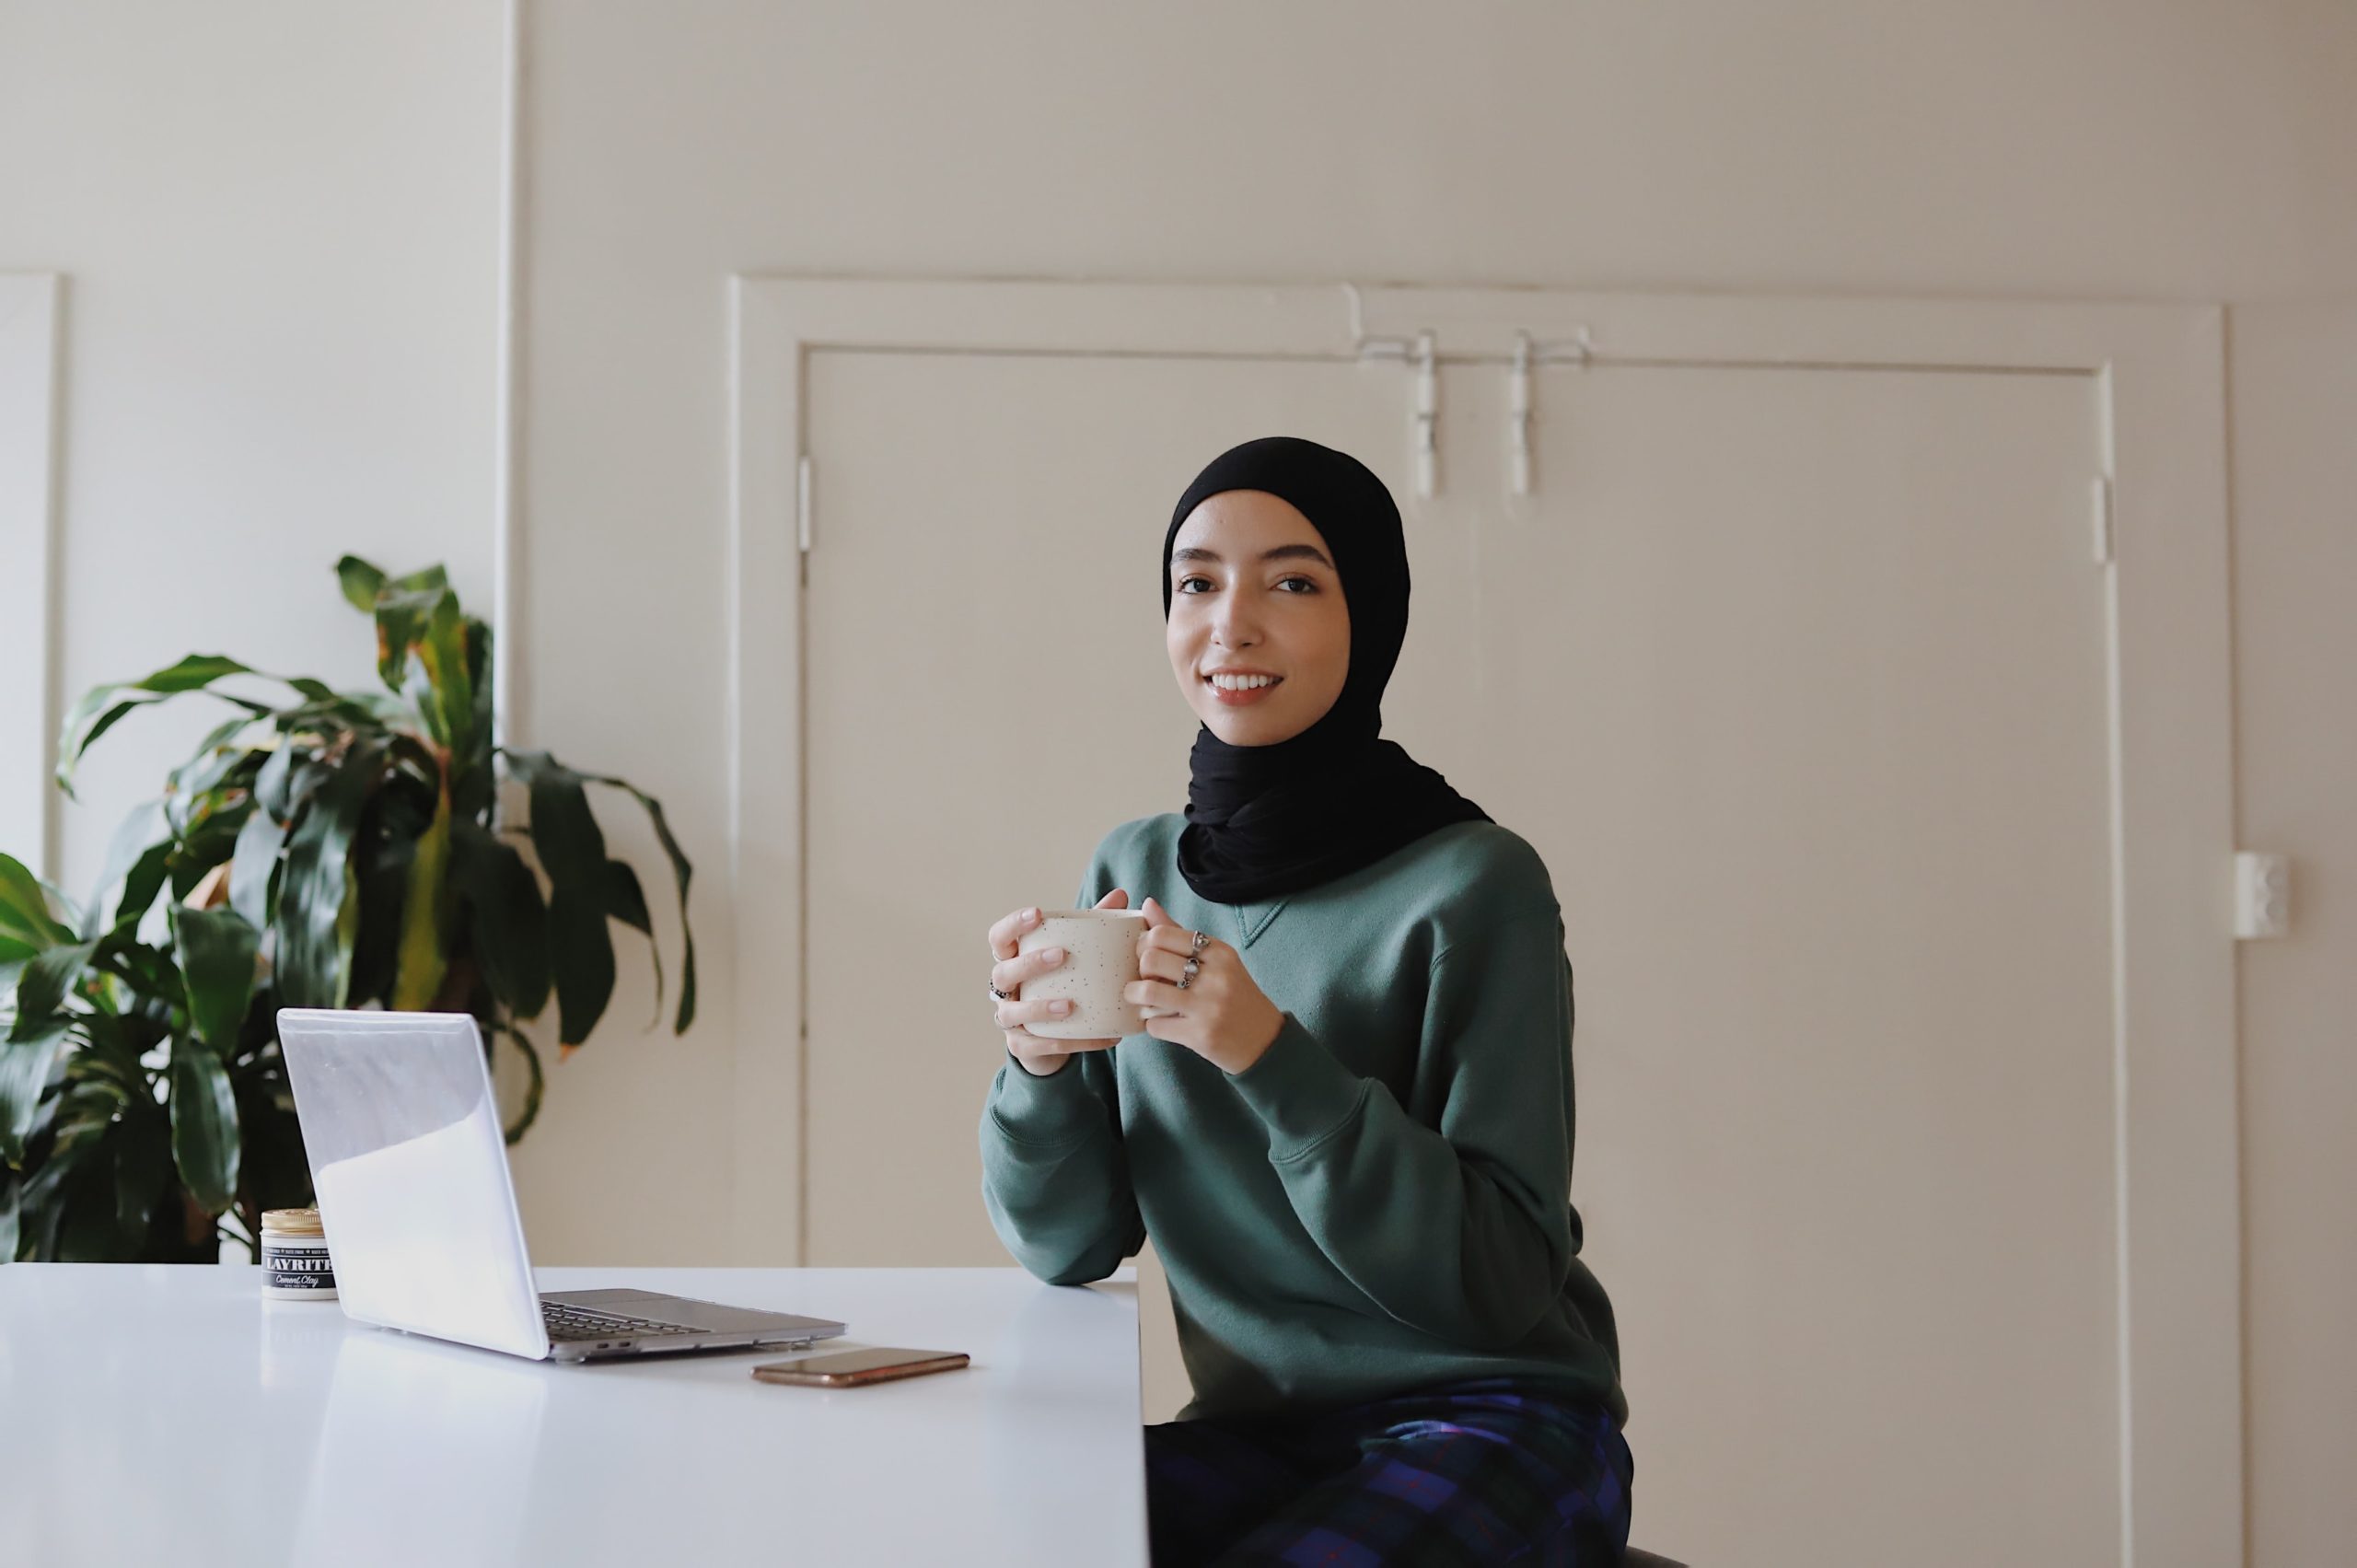 A young woman in a green sweater and a black hijab holding a mug and smiling